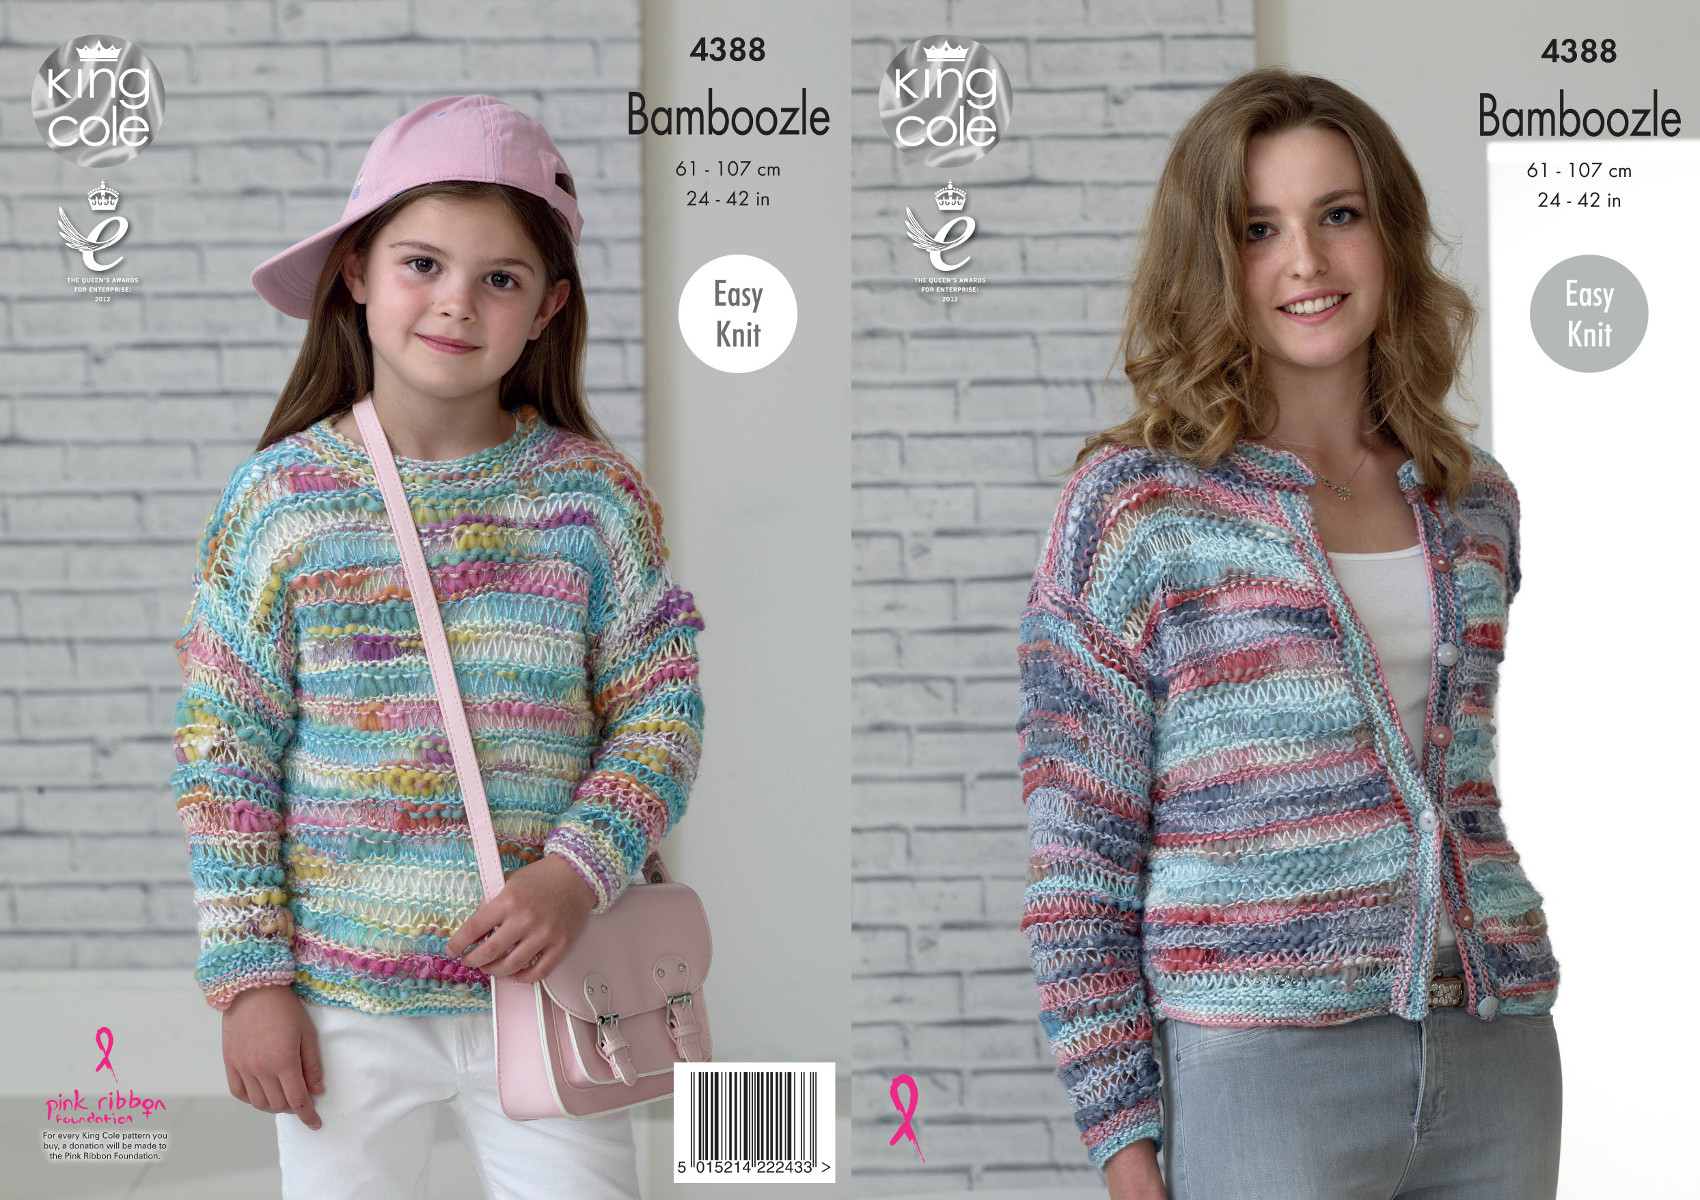 Knitting Patterns For Women Details About King Cole Bamboozle Knitting Pattern Women Girls Easy Knit Sweater Cardigan 4388